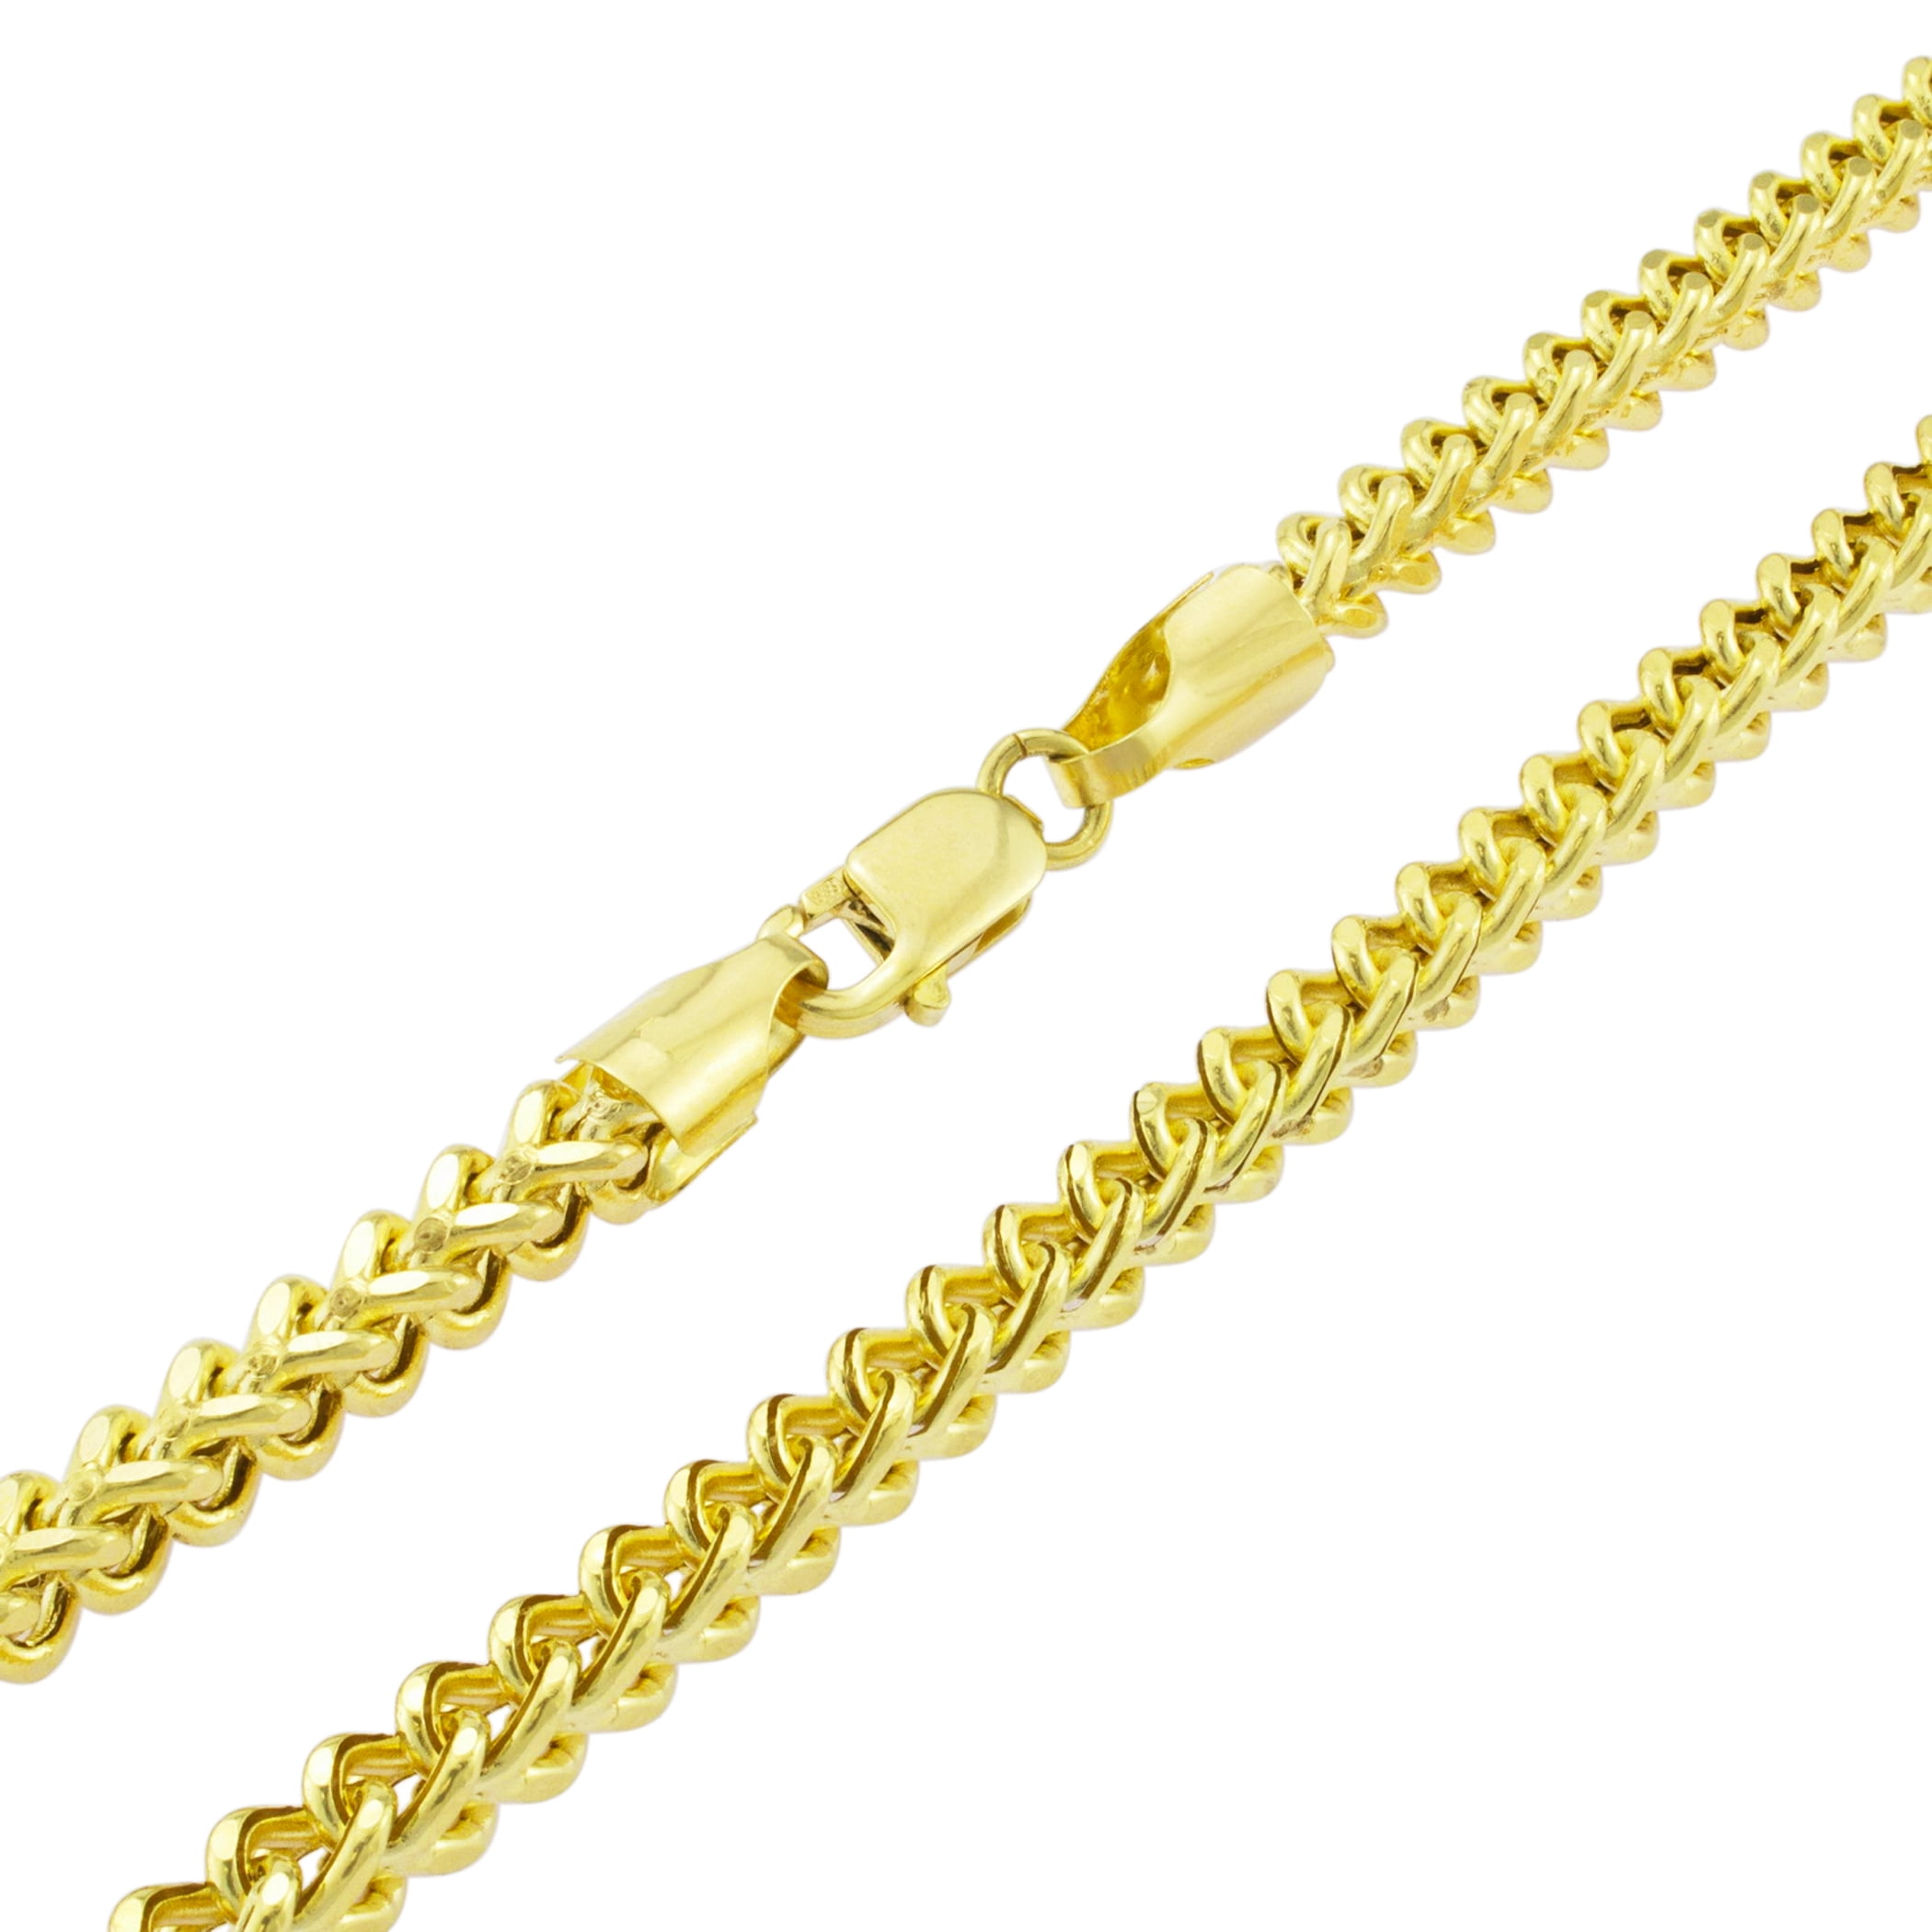 All Lengths Ring Or Lobster Clasp .5mm Guaranteed 14K Gold Box Chain Necklace